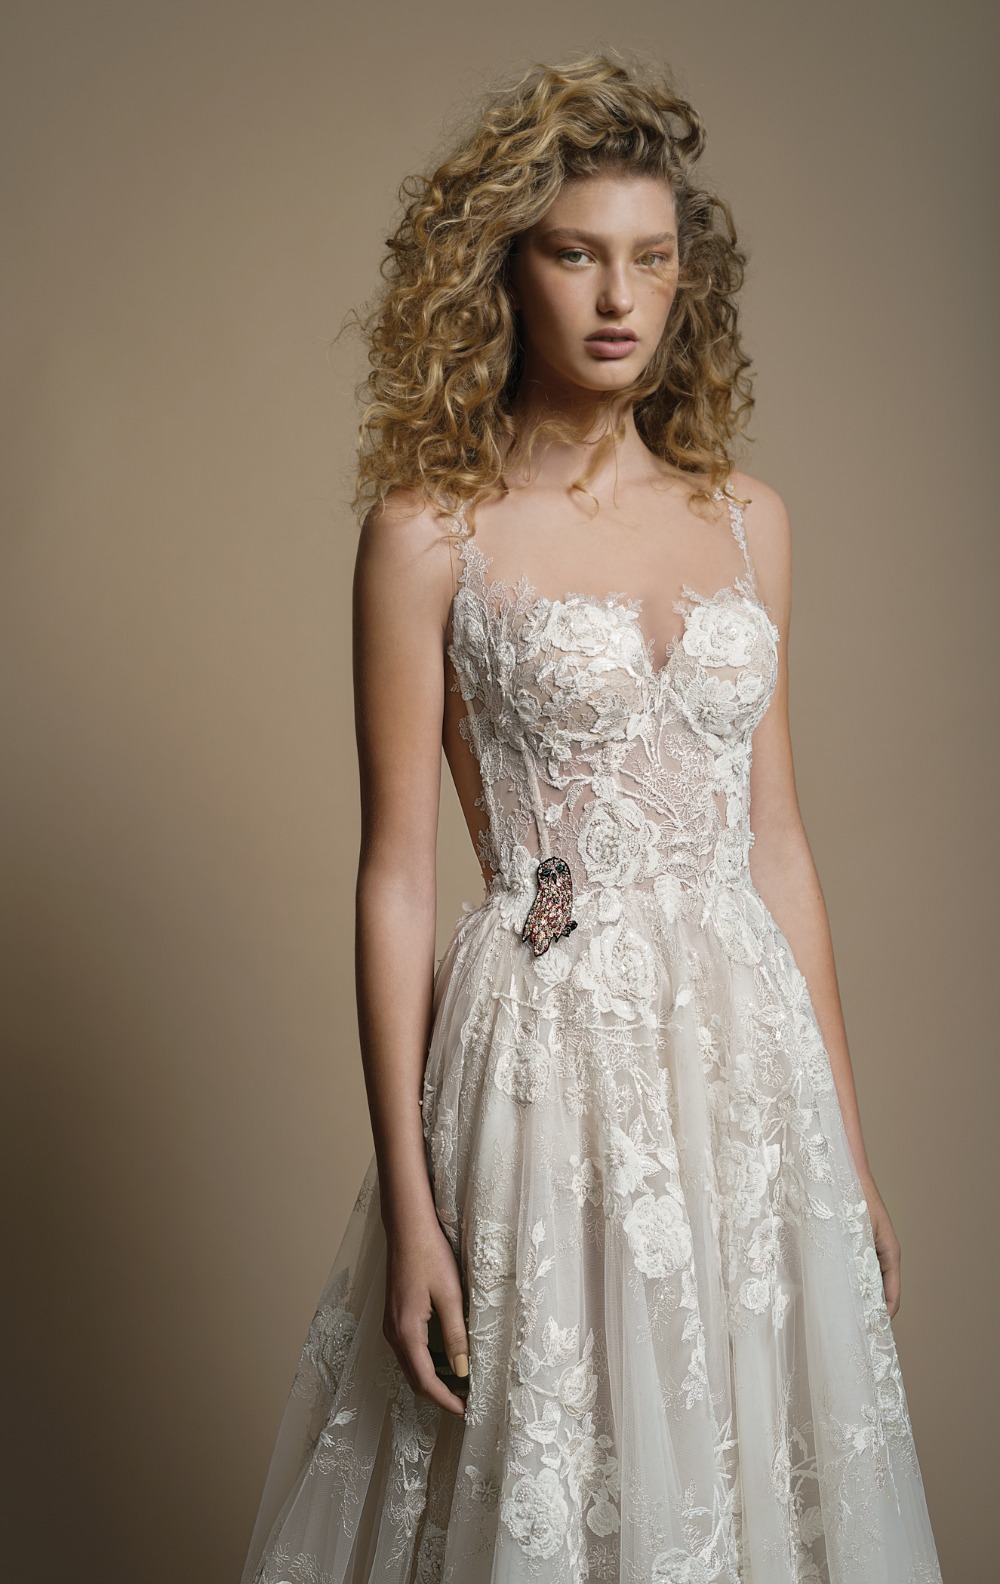 Elaborate lace ballgown featuring a sheer corset with a sheer back from Galia Lahav